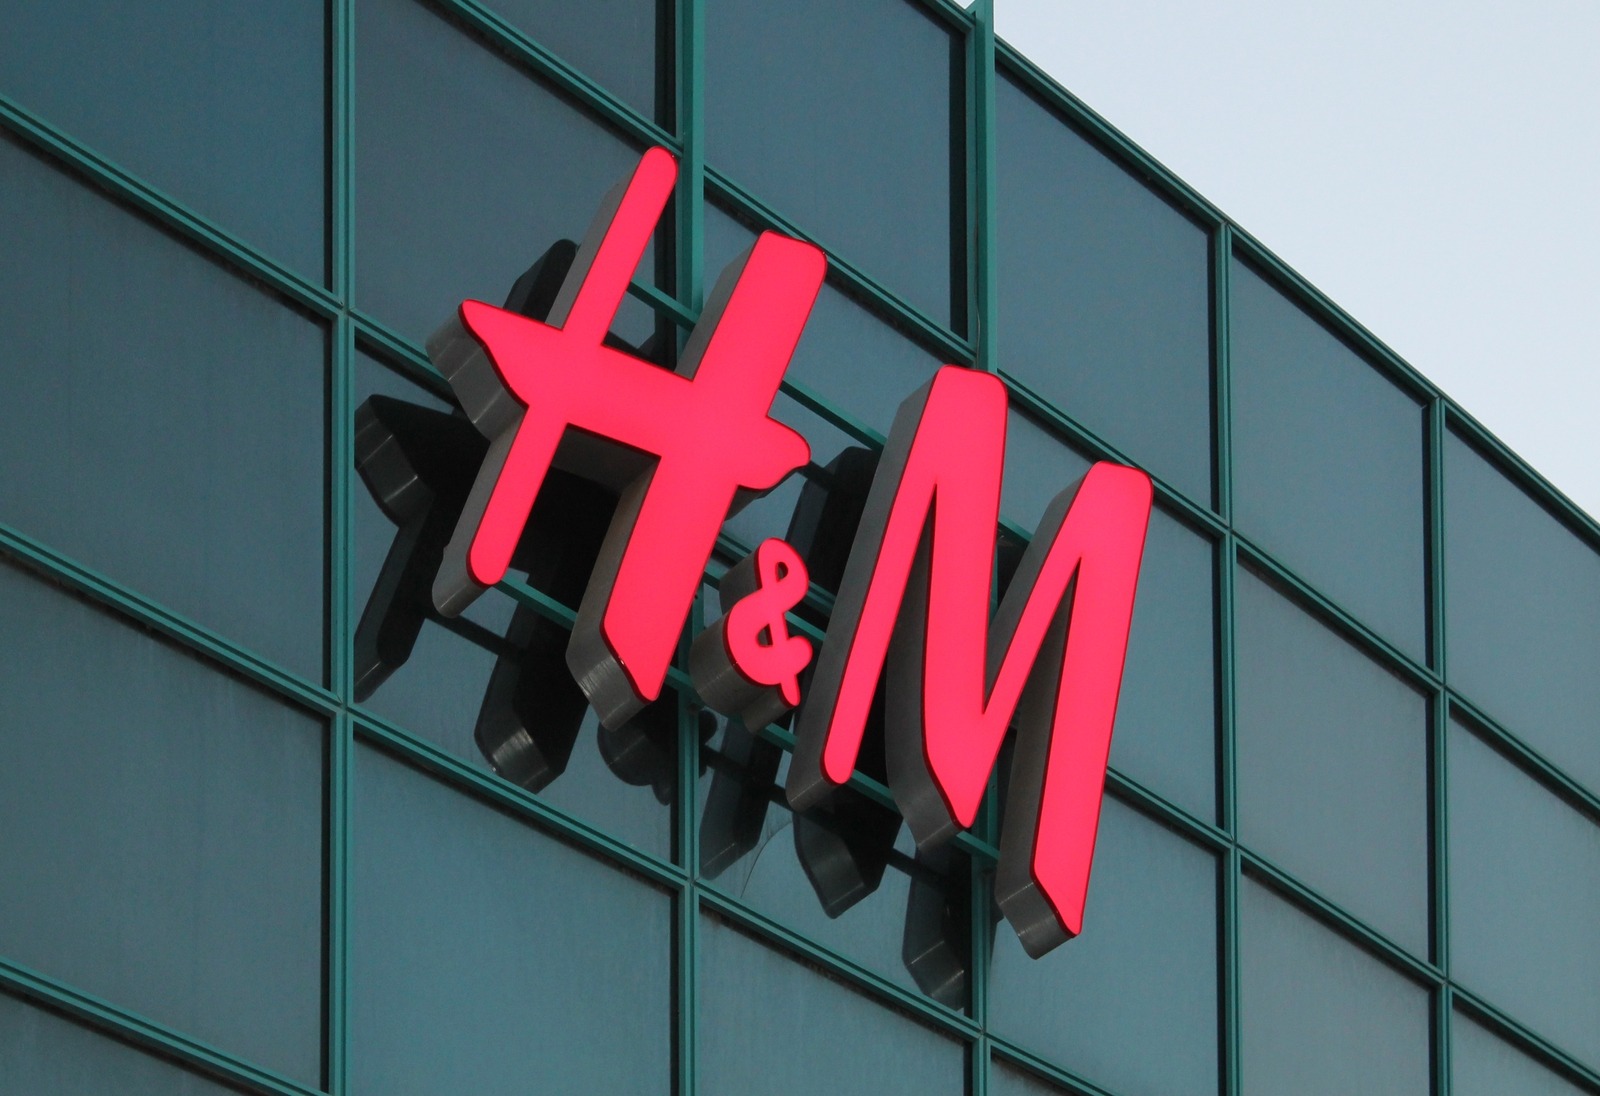 H&M Makes Strides in Promoting Transparency by Listing Supplier